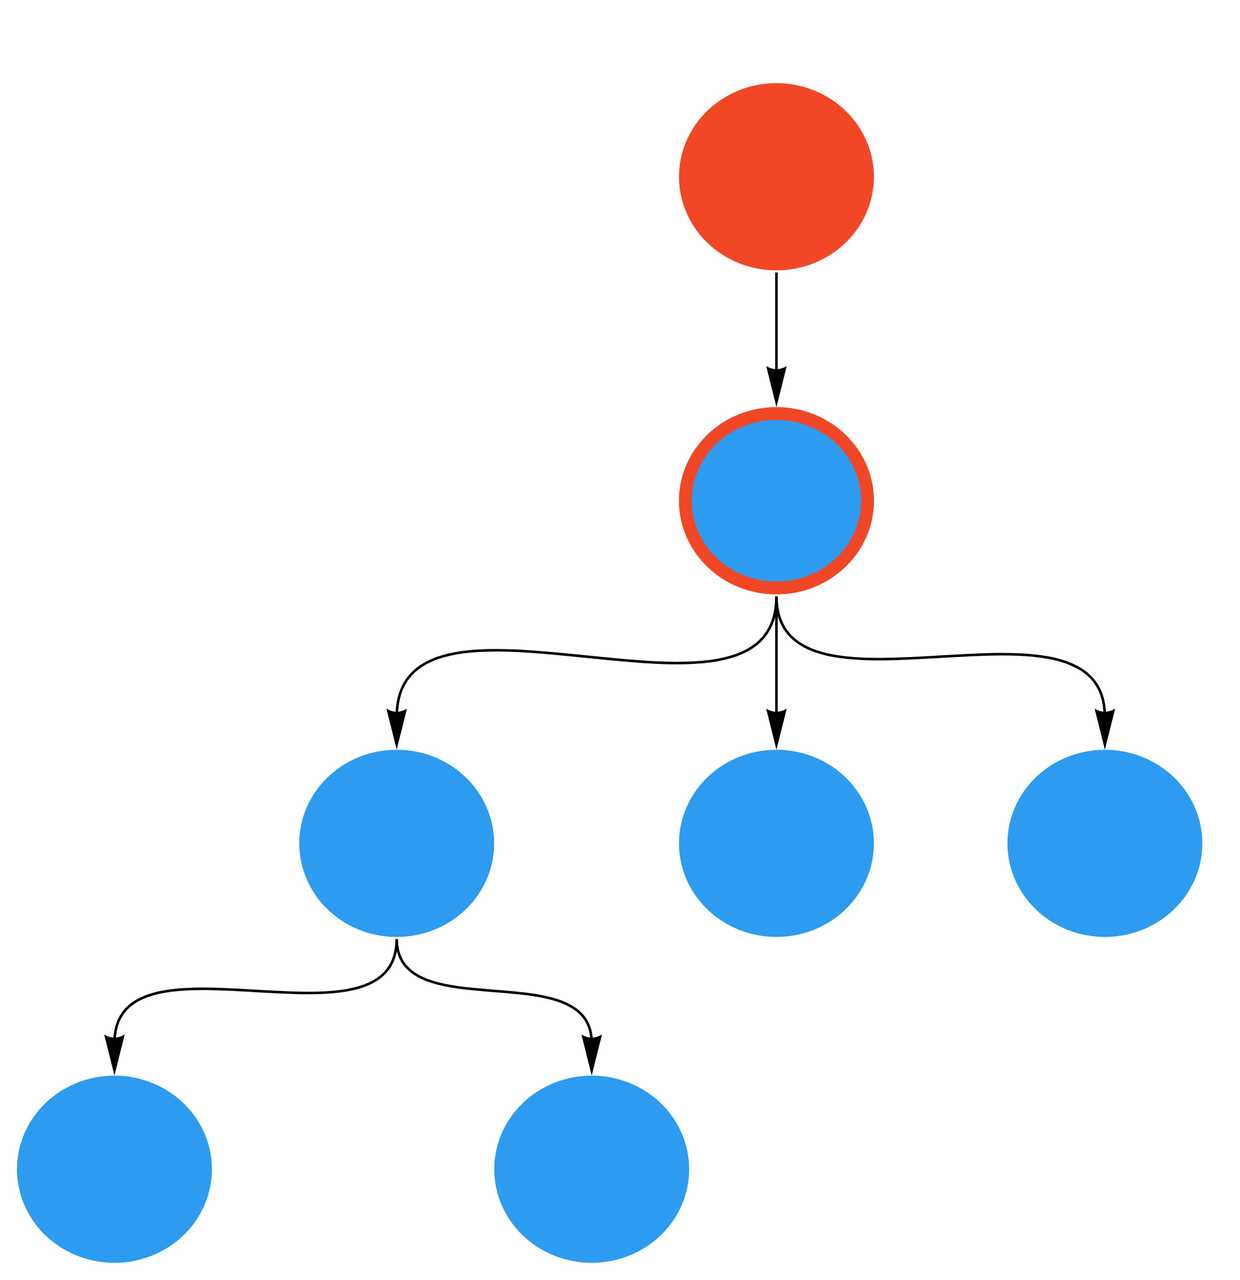 A tree of blue AngularJS nodes, but the blue root node is now wrapped in a red circle (an Angular upgrade wrapper) and has a red node parent above it.